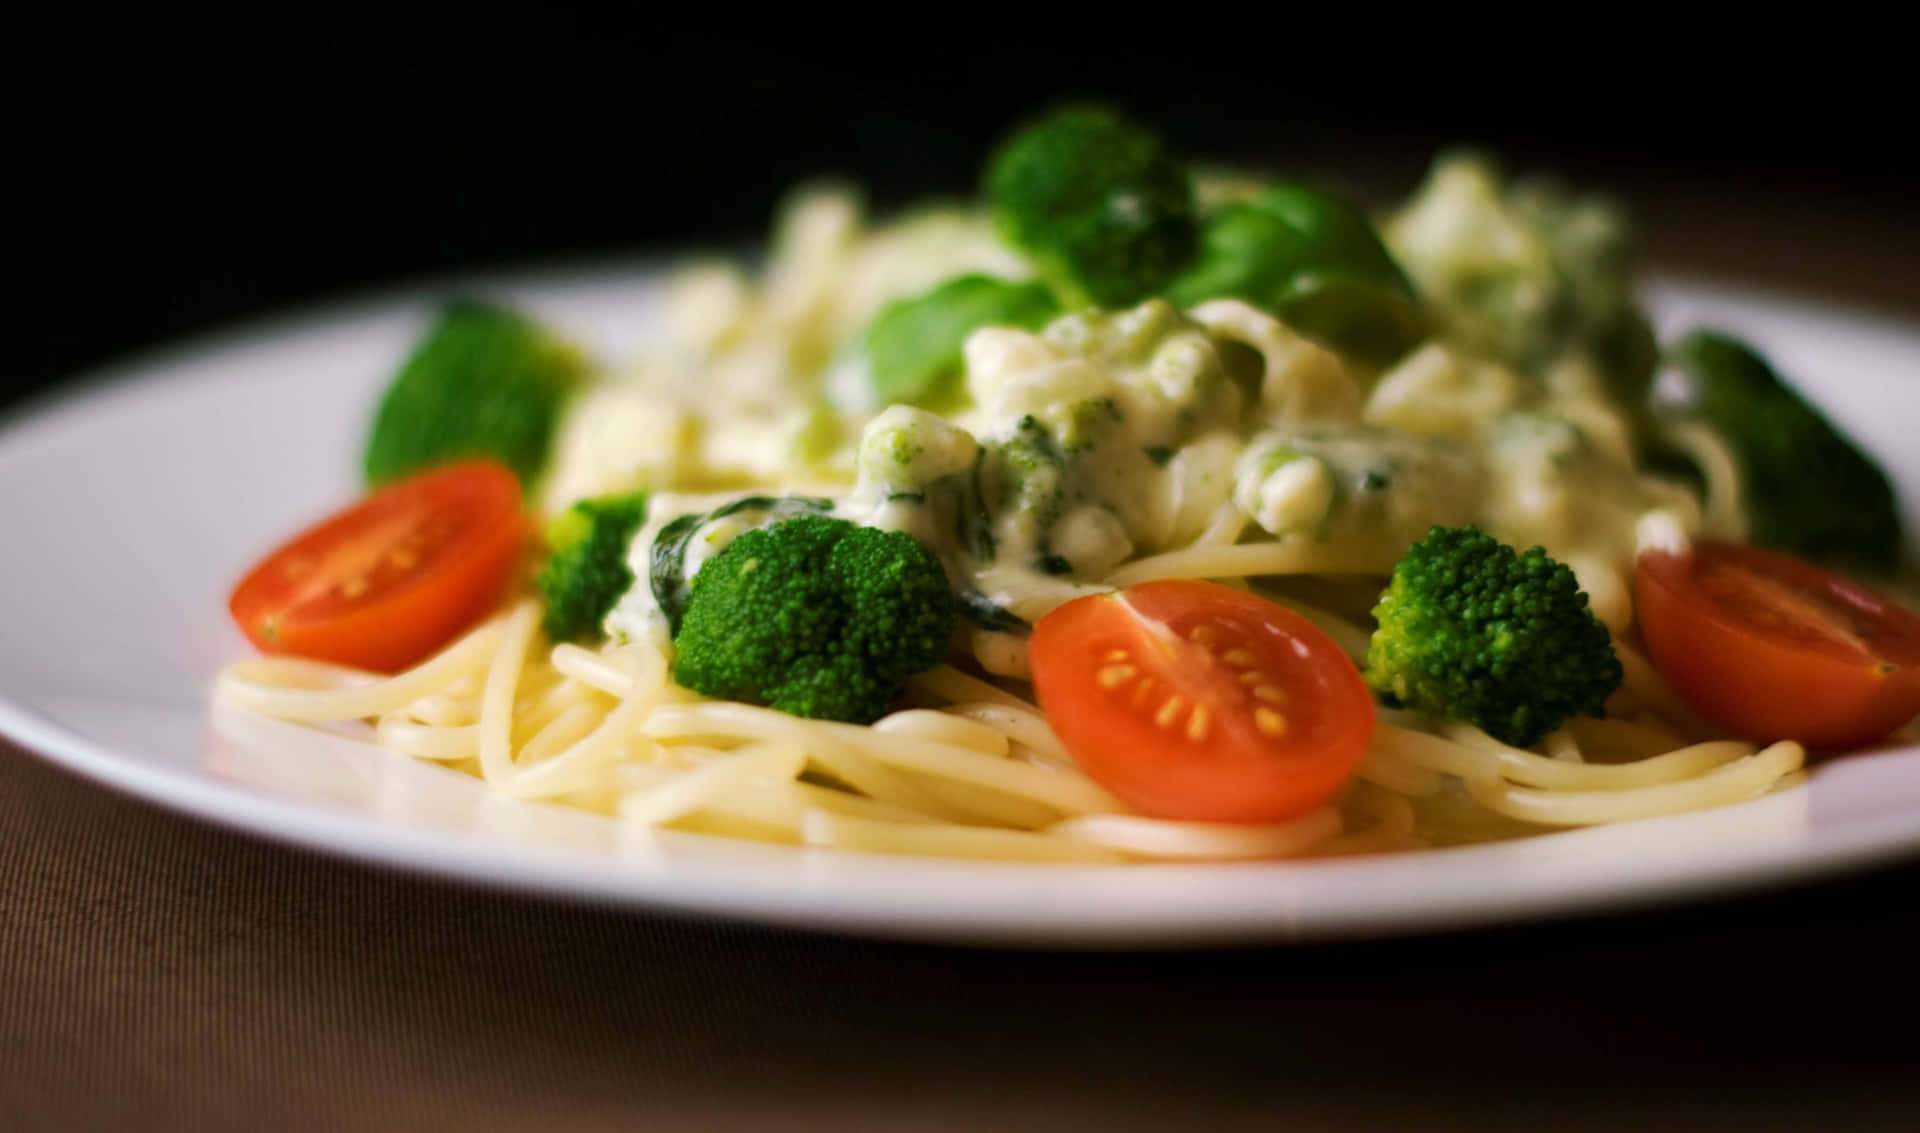 A Plate Of Pasta With Broccoli And Tomatoes